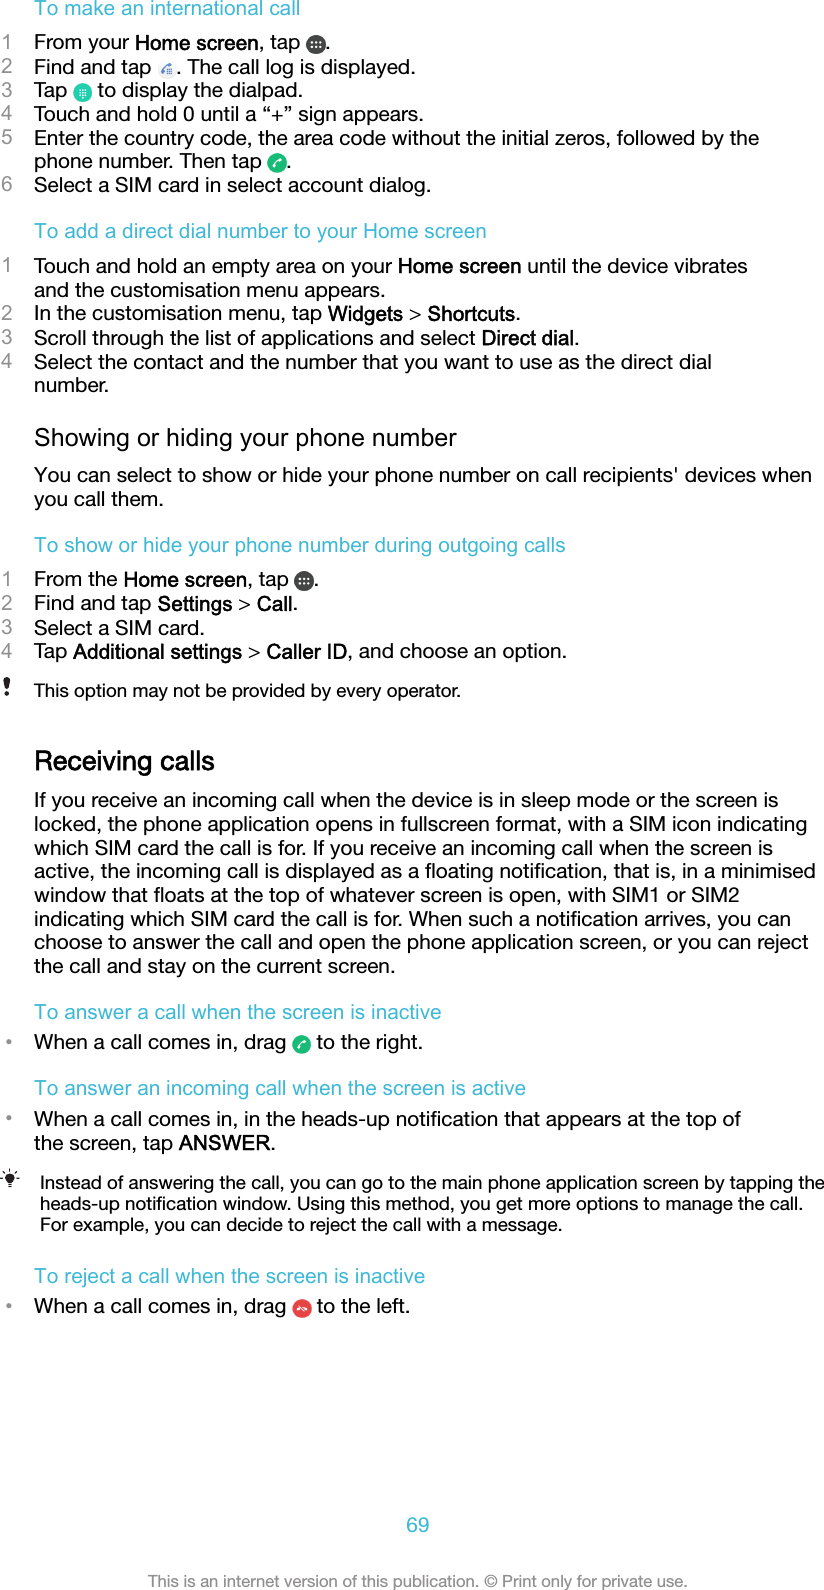 To make an international call1From your Home screen, tap  .2Find and tap  . The call log is displayed.3Tap   to display the dialpad.4Touch and hold 0 until a “+” sign appears.5Enter the country code, the area code without the initial zeros, followed by thephone number. Then tap  .6Select a SIM card in select account dialog.To add a direct dial number to your Home screen1Touch and hold an empty area on your Home screen until the device vibratesand the customisation menu appears.2In the customisation menu, tap Widgets &gt; Shortcuts.3Scroll through the list of applications and select Direct dial.4Select the contact and the number that you want to use as the direct dialnumber.Showing or hiding your phone numberYou can select to show or hide your phone number on call recipients&apos; devices whenyou call them.To show or hide your phone number during outgoing calls1From the Home screen, tap  .2Find and tap Settings &gt; Call.3Select a SIM card.4Tap Additional settings &gt; Caller ID, and choose an option.This option may not be provided by every operator.Receiving callsIf you receive an incoming call when the device is in sleep mode or the screen islocked, the phone application opens in fullscreen format, with a SIM icon indicatingwhich SIM card the call is for. If you receive an incoming call when the screen isactive, the incoming call is displayed as a ﬂoating notiﬁcation, that is, in a minimisedwindow that ﬂoats at the top of whatever screen is open, with SIM1 or SIM2indicating which SIM card the call is for. When such a notiﬁcation arrives, you canchoose to answer the call and open the phone application screen, or you can rejectthe call and stay on the current screen.To answer a call when the screen is inactive•When a call comes in, drag   to the right.To answer an incoming call when the screen is active•When a call comes in, in the heads-up notiﬁcation that appears at the top ofthe screen, tap ANSWER.Instead of answering the call, you can go to the main phone application screen by tapping theheads-up notiﬁcation window. Using this method, you get more options to manage the call.For example, you can decide to reject the call with a message.To reject a call when the screen is inactive•When a call comes in, drag   to the left.69This is an internet version of this publication. © Print only for private use.